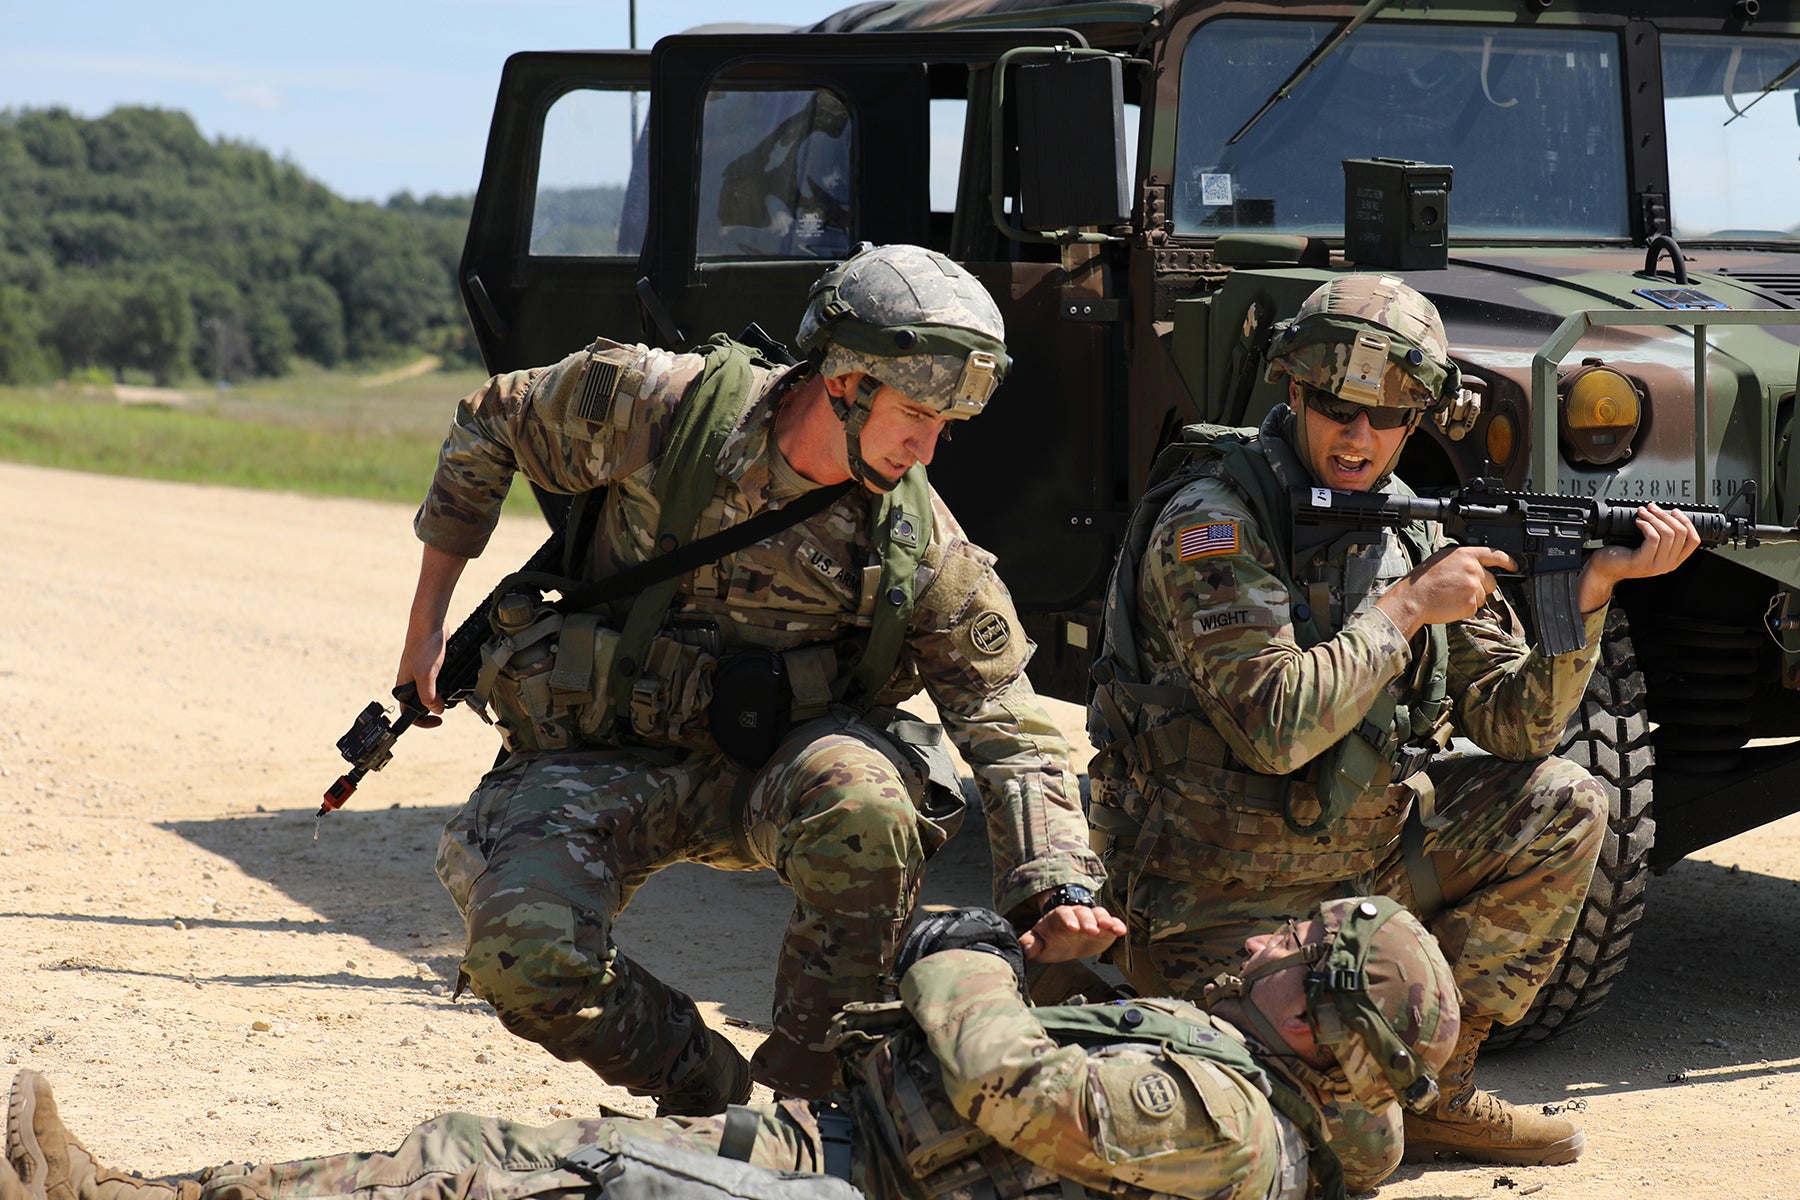 U.S. Army Reserve Soldiers assigned to the 888th Movement Control Team (MCT) Cranston, Rhode Island, assist a simulated-injured Soldier during convoy operations lane training at CSTX 86-22-02 at Fort McCoy, Wisconsin, August 16, 2022. In this scenario, Soldiers trained on reacting to small arms fire and evacuating a casualty.

(U.S. Army Reserve photo by Staff Sgt. David Lietz)